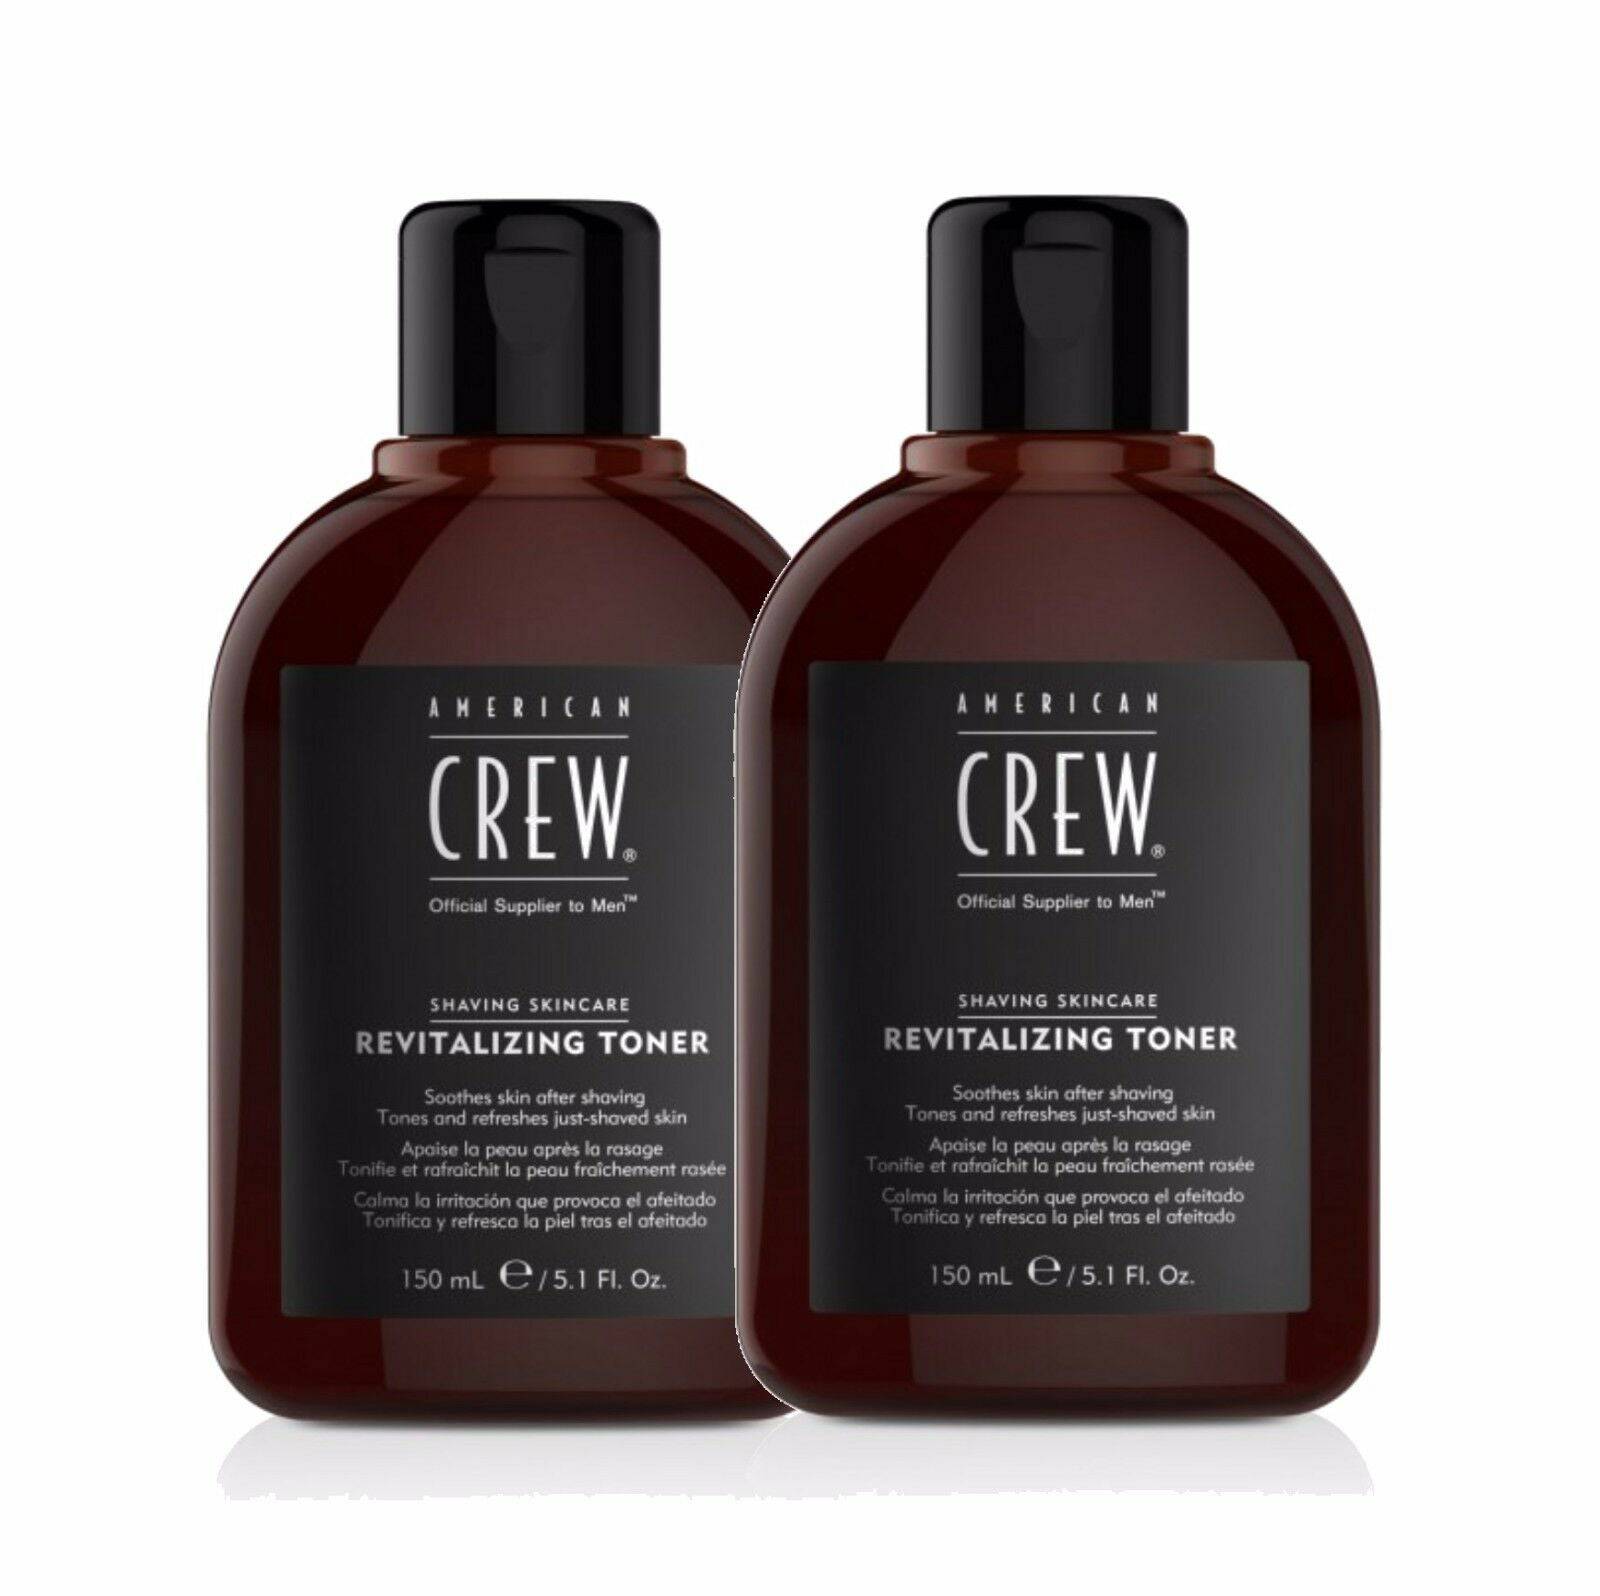 American Crew Shaving Skincare Revitalizing Toner 2 x 150ml (Duo) Soothes Skin - On Line Hair Depot